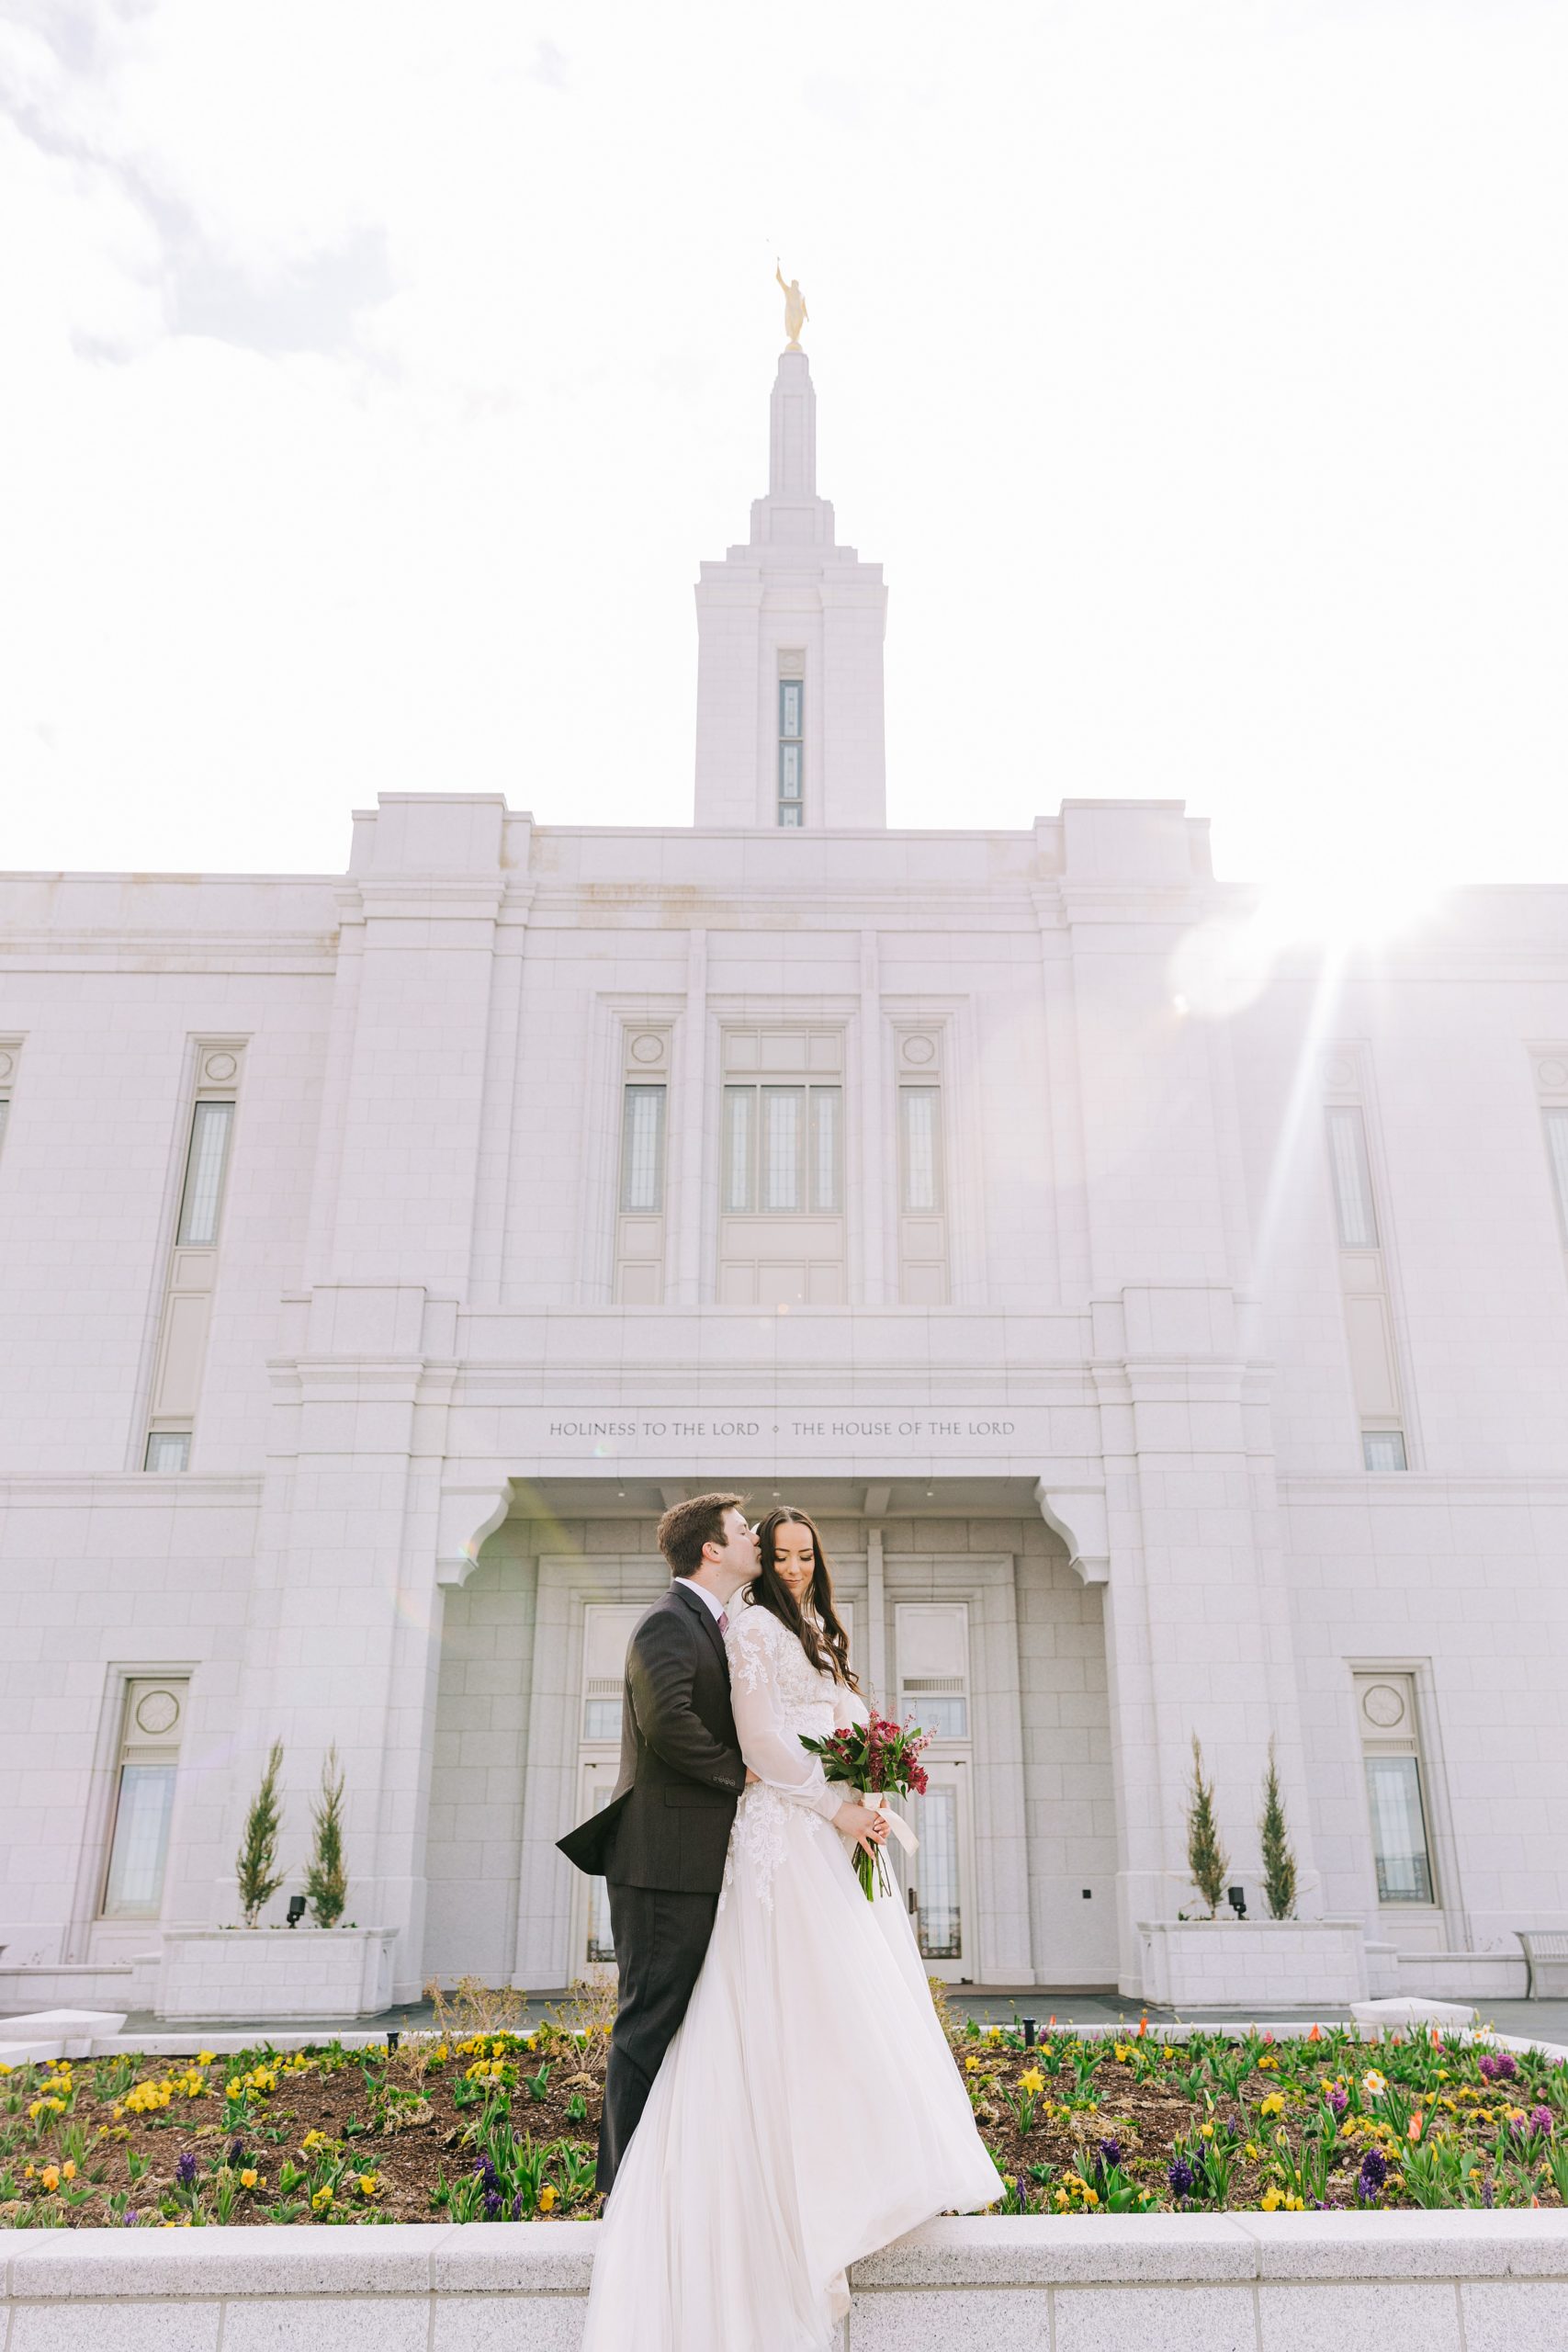 windy bright pocatello bridals with couple standing on garden bed with temple behind them